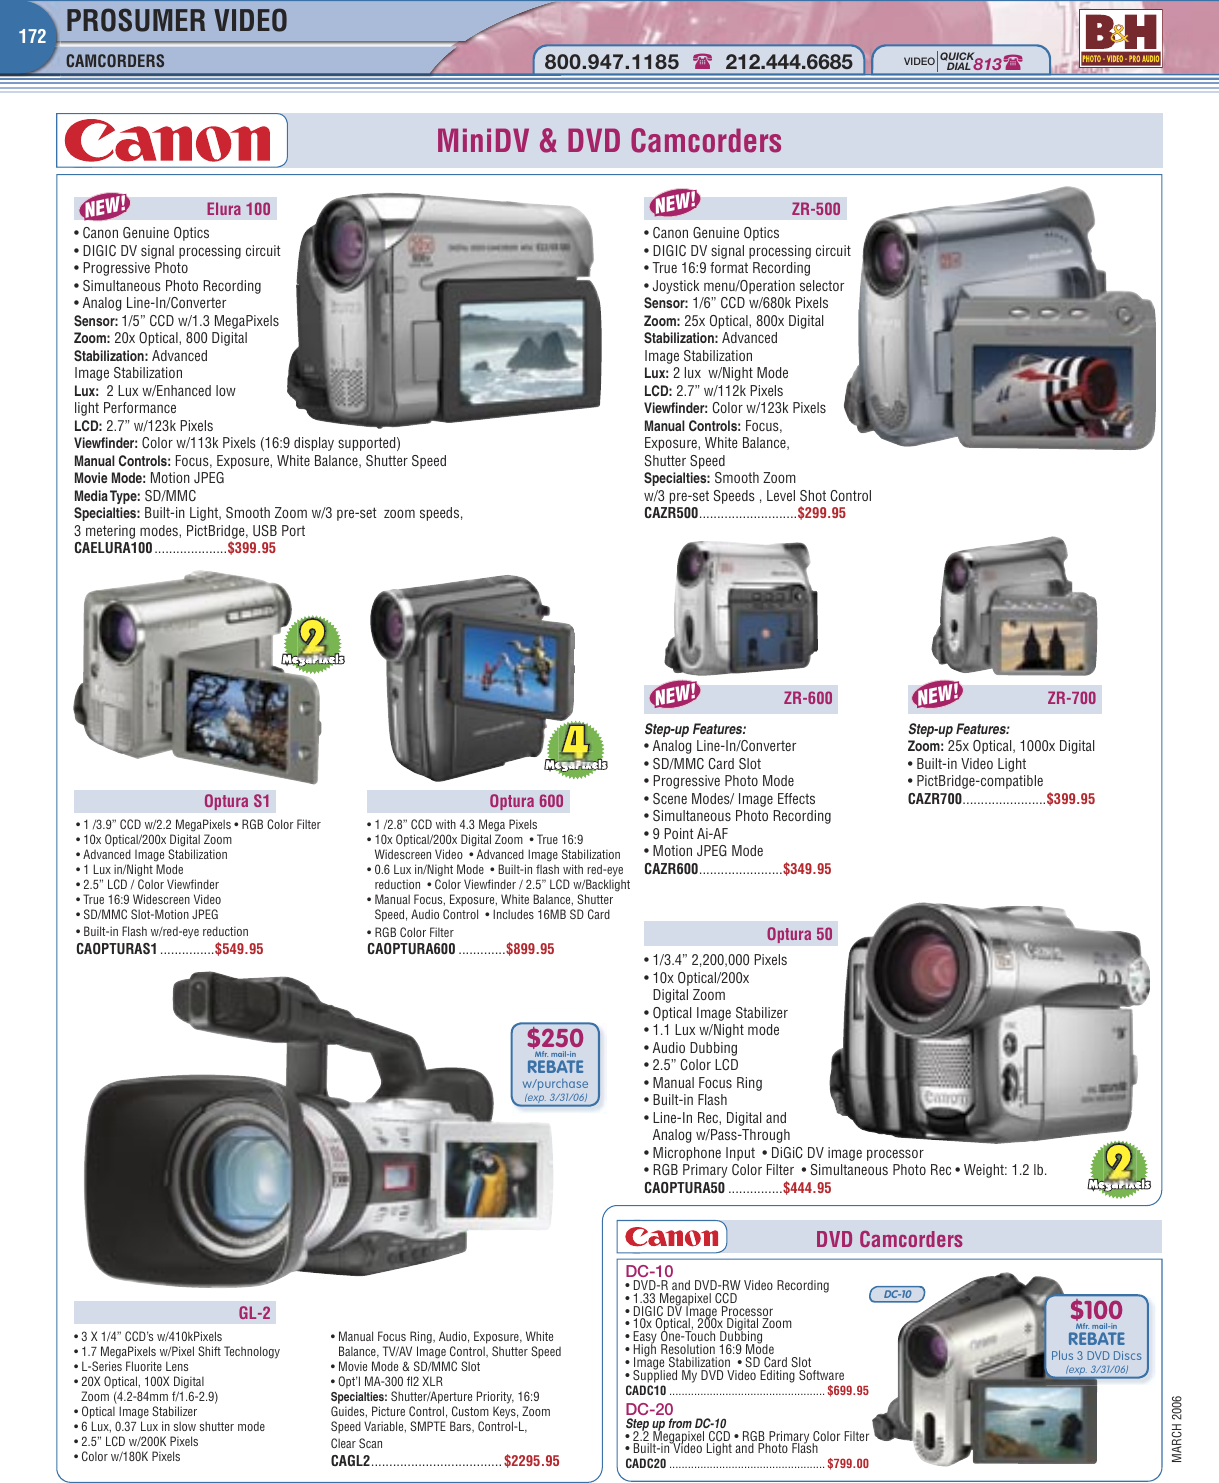 Page 1 of 12 - Canon Canon-Elura-100-Users-Manual- 172-183 ProsumerVideo 03-06  Canon-elura-100-users-manual